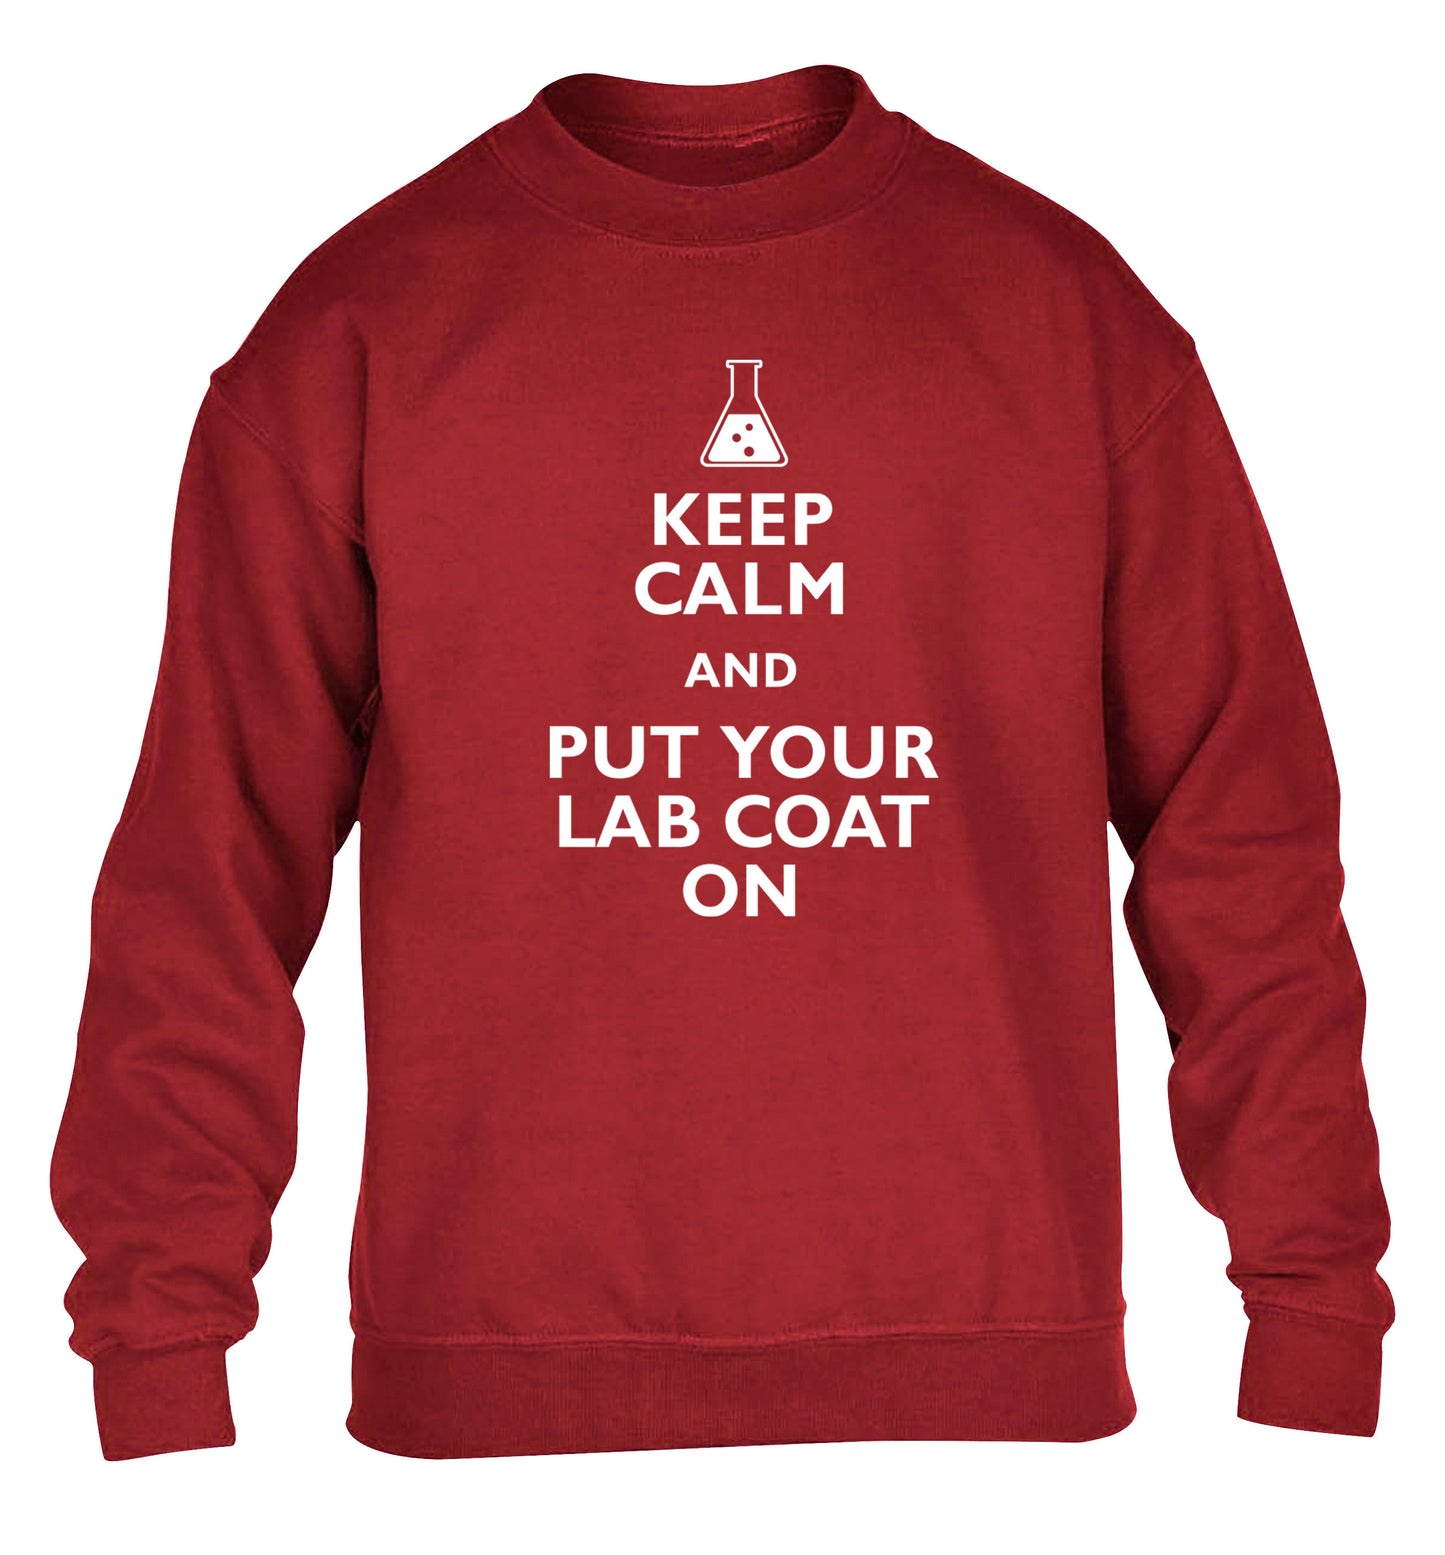 Keep calm and put your lab coat on children's grey sweater 12-14 Years